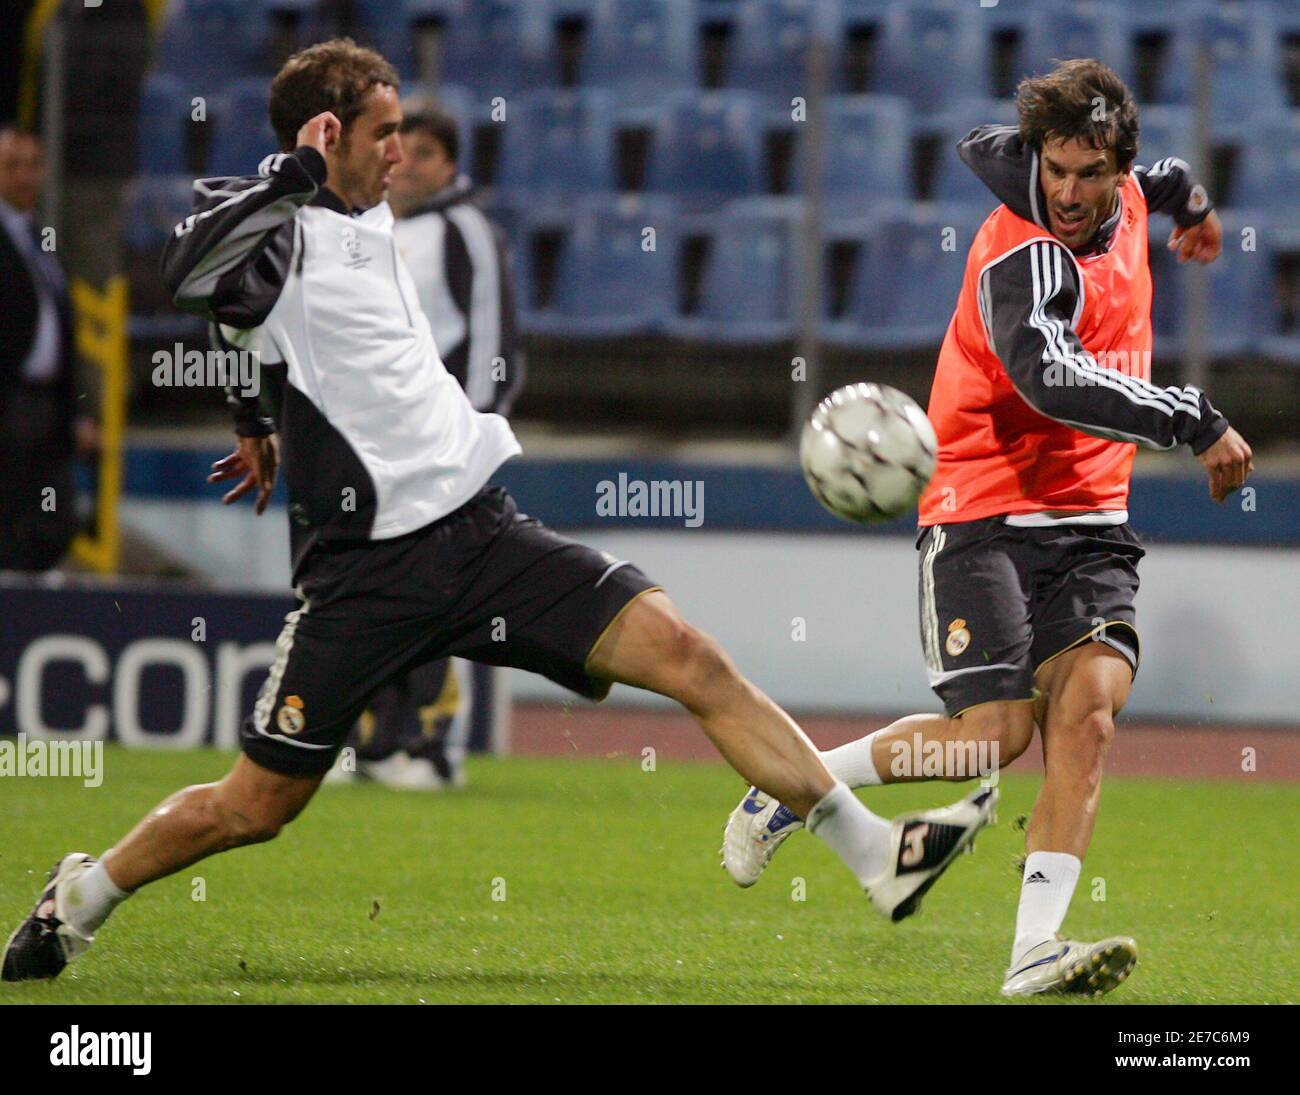 Real Madrid's Ivan Helguera (L) fights for the ball with Ruud van  Nistelrooy during their team's official training session, ahead of their  UEFA Champions League Group E soccer match against Steaua Bucharest,